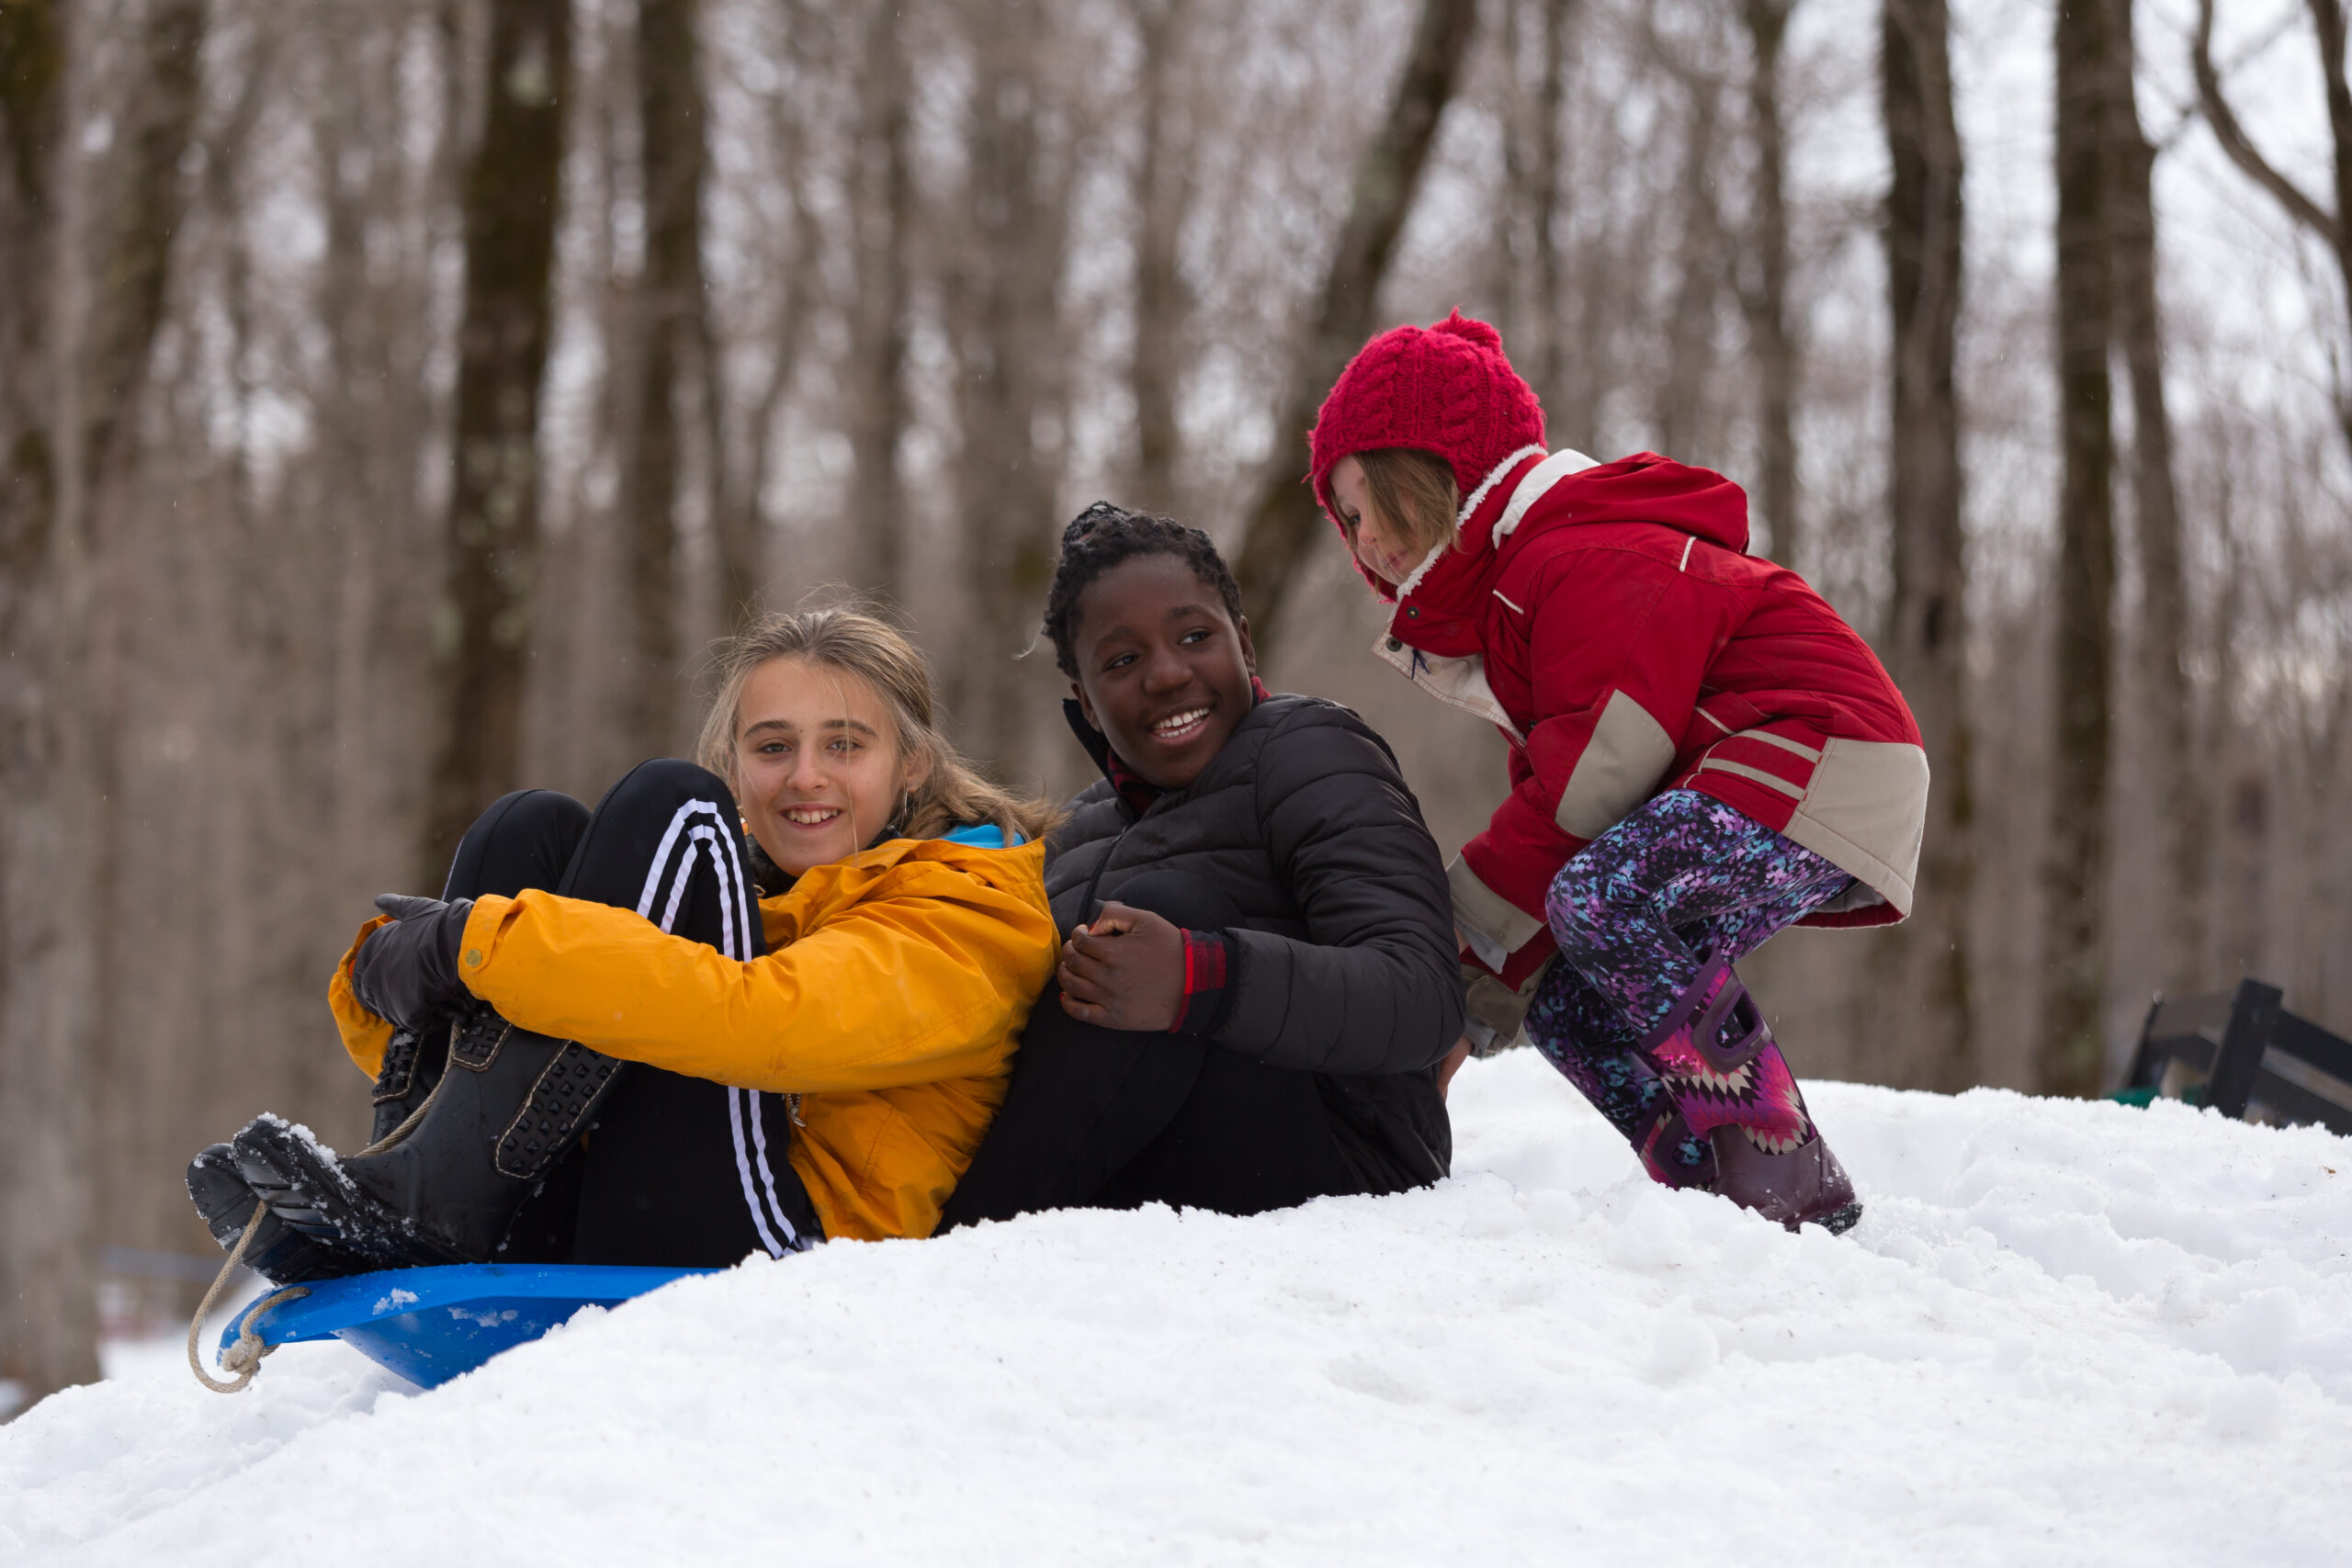 three girls on a sled having fun and about to sled down a hill